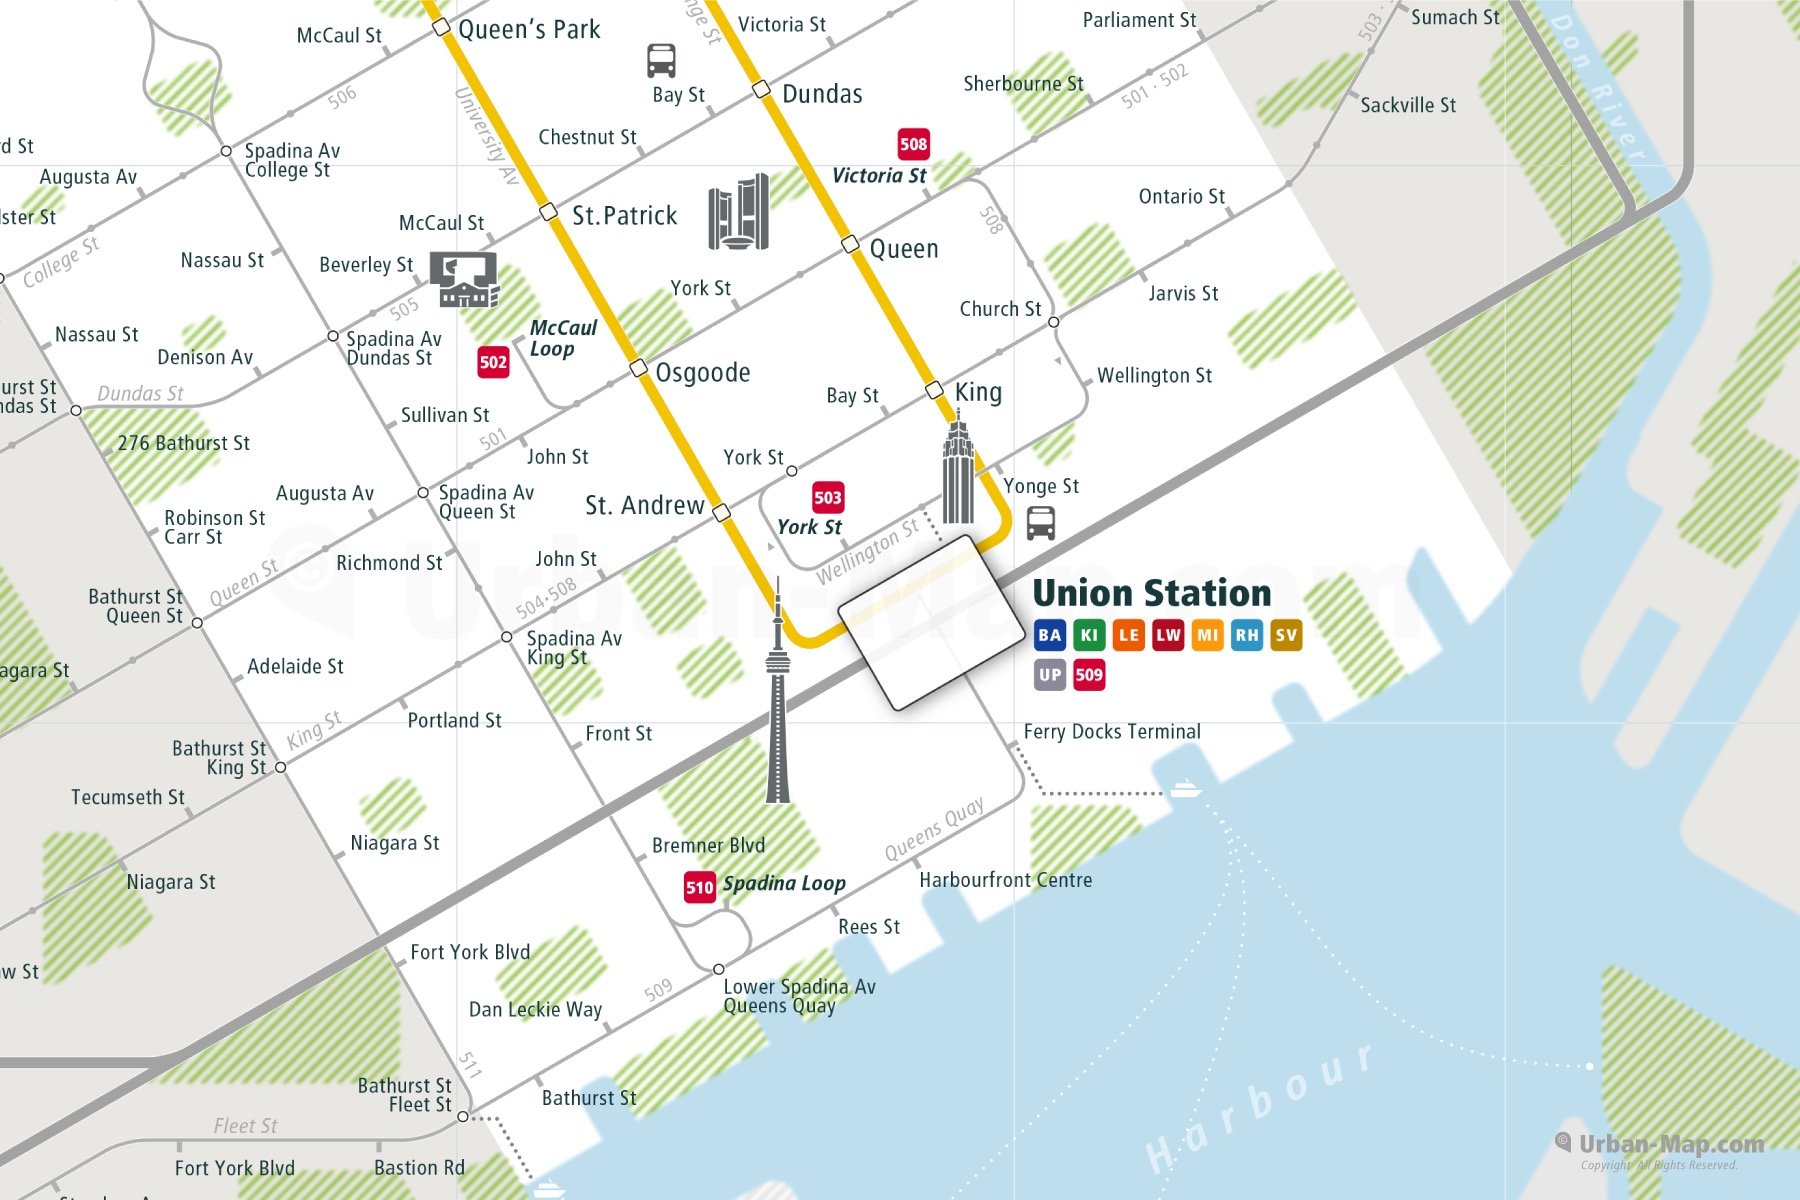 Toronto City Rail Map shows the train and public transportation routes of Metro, Tram - Close-Up